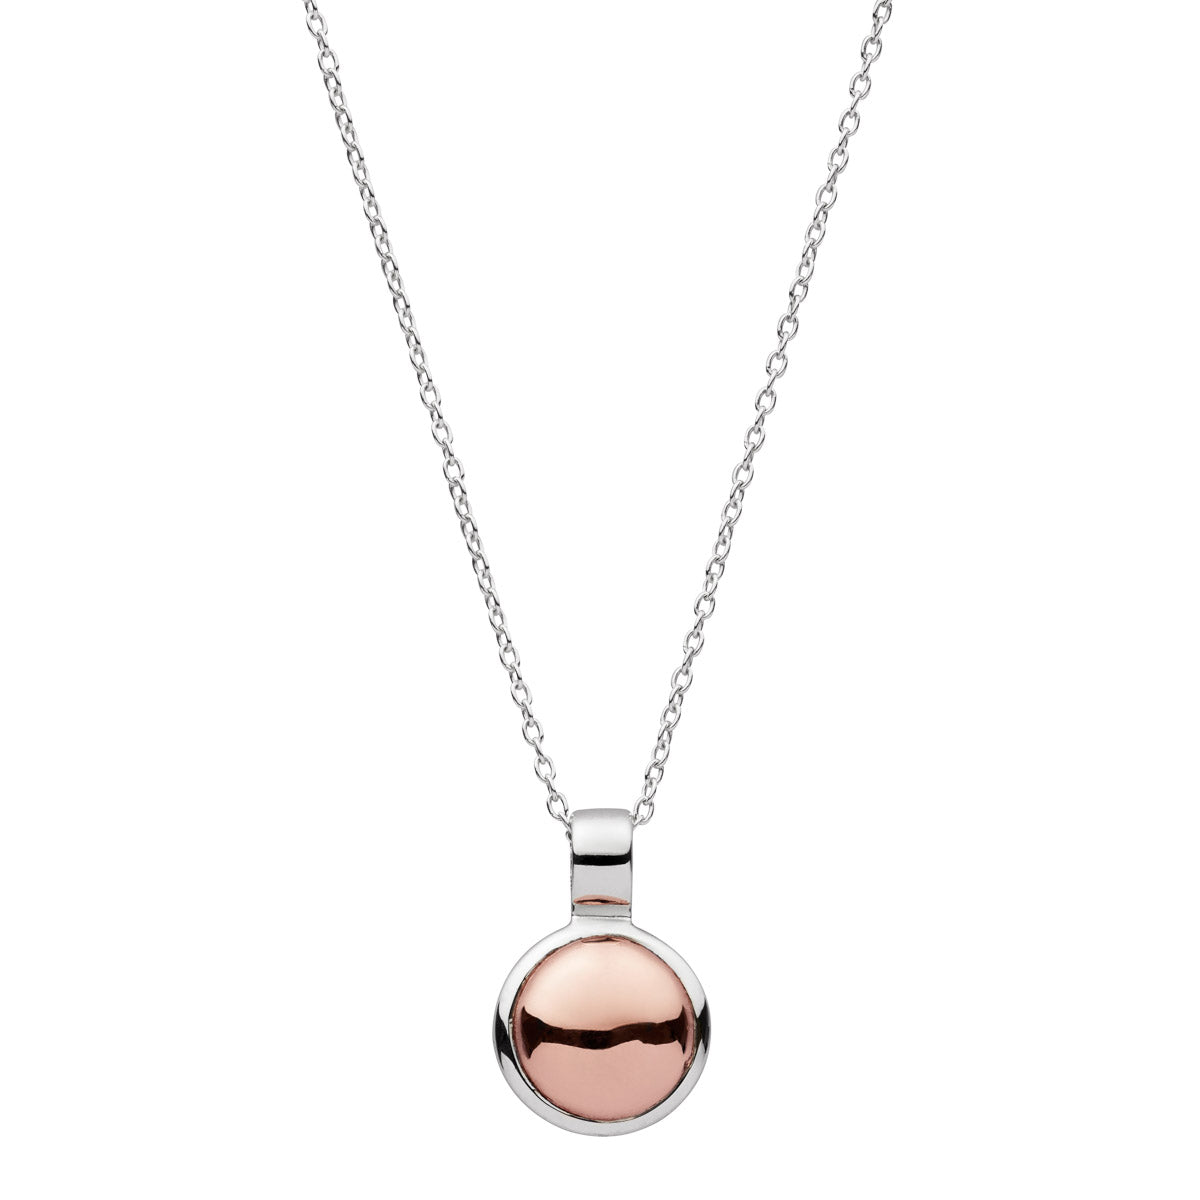 Rosy glow necklace